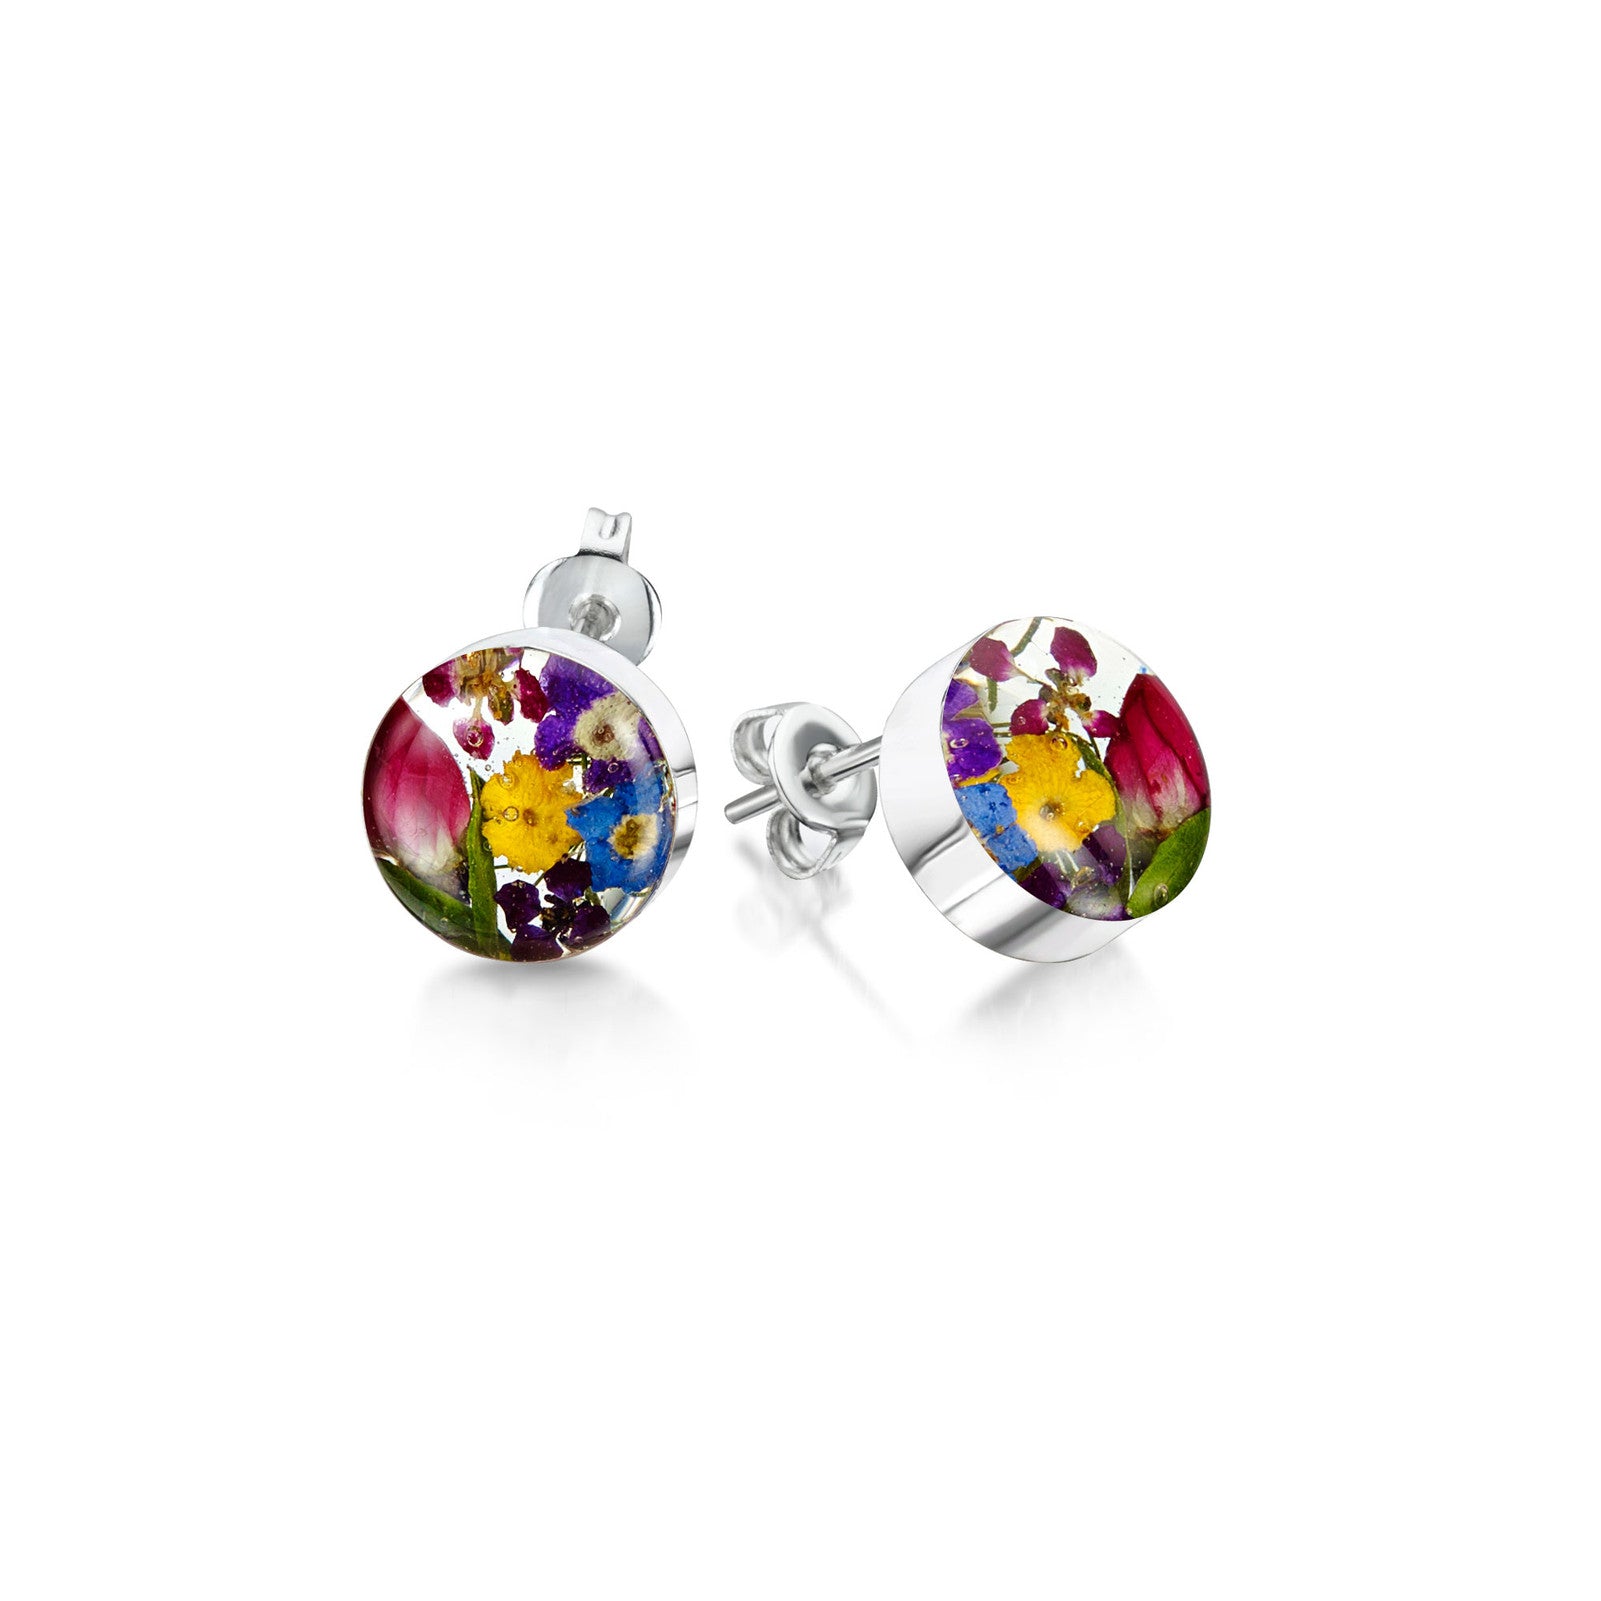 Silver stud Earrings - Mixed flowers + yellow - Small round